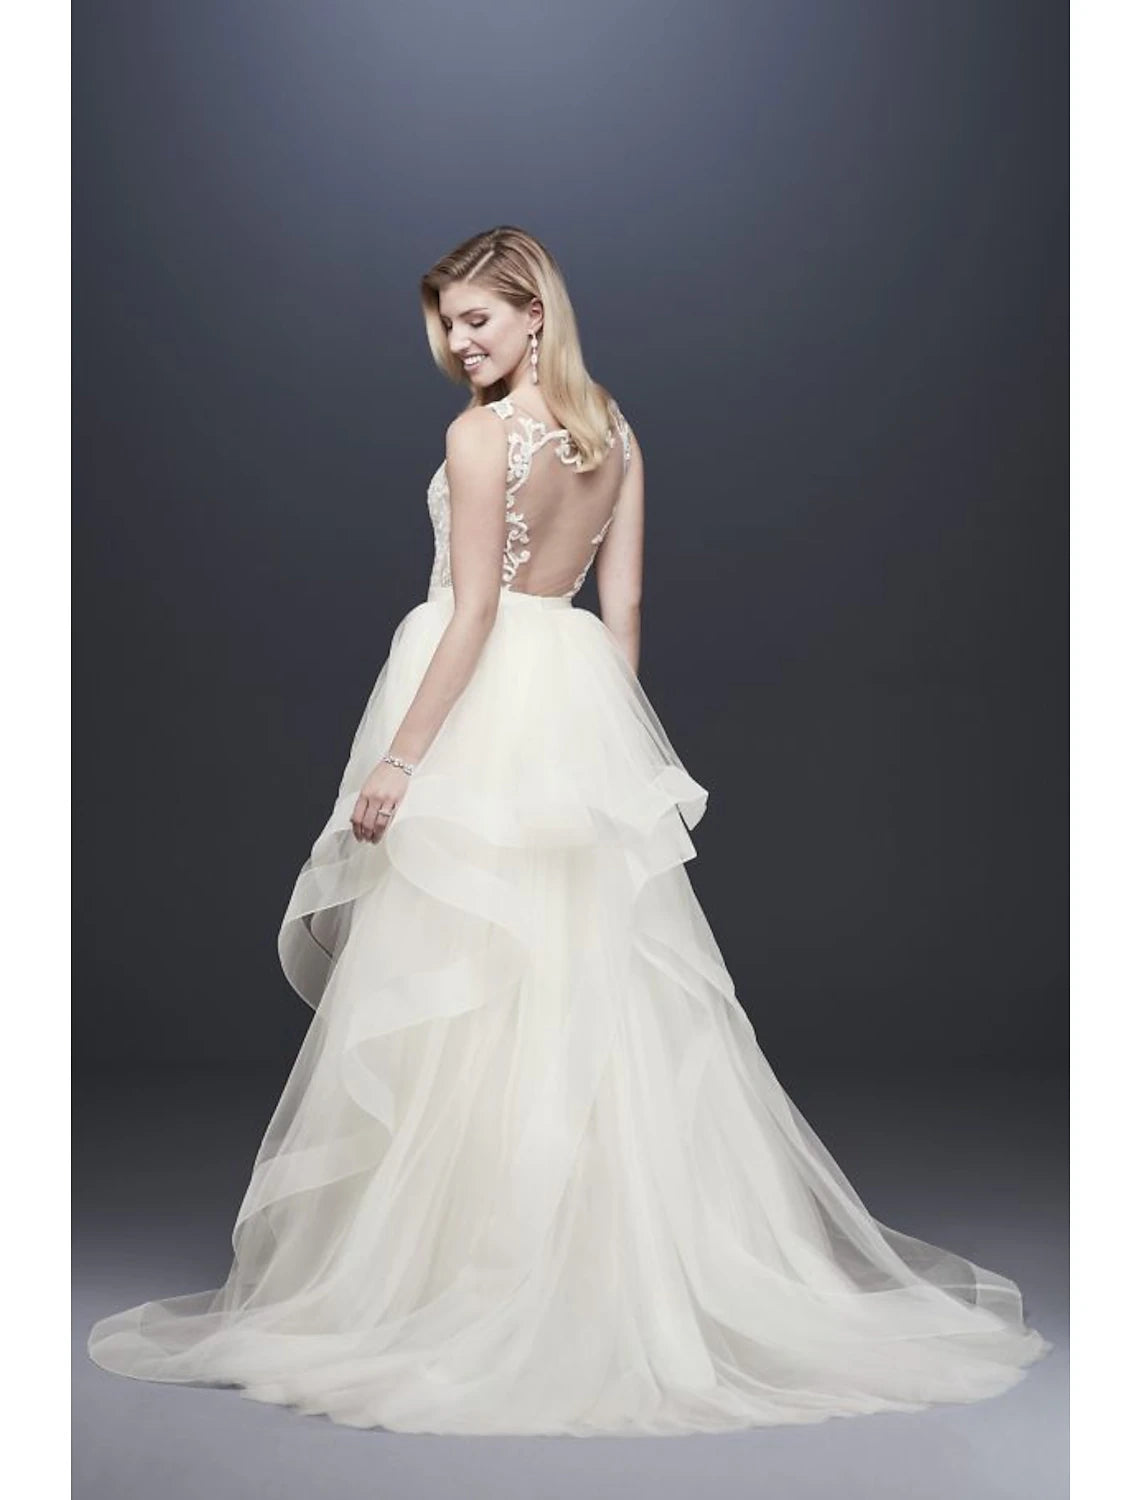 wholesale Formal Wedding Dresses A-Line Separates Separates Court Train Satin Bridal Skirts Bridal Gowns With Solid Color